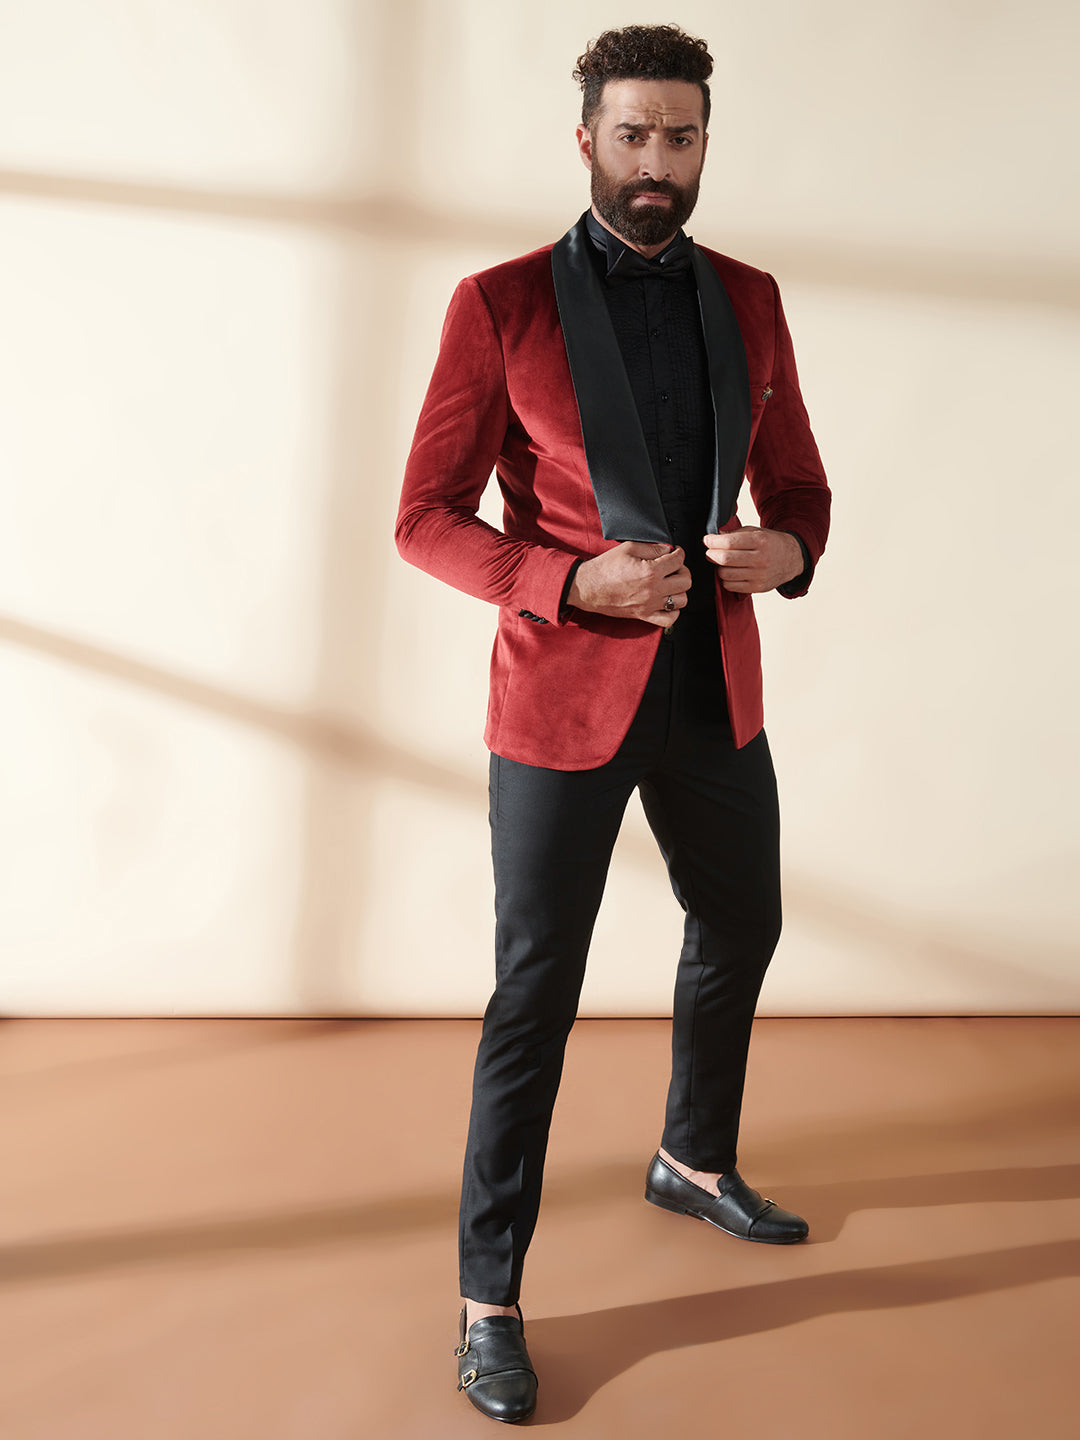 French Style: Thierry Henry in Elegant Slim Suits